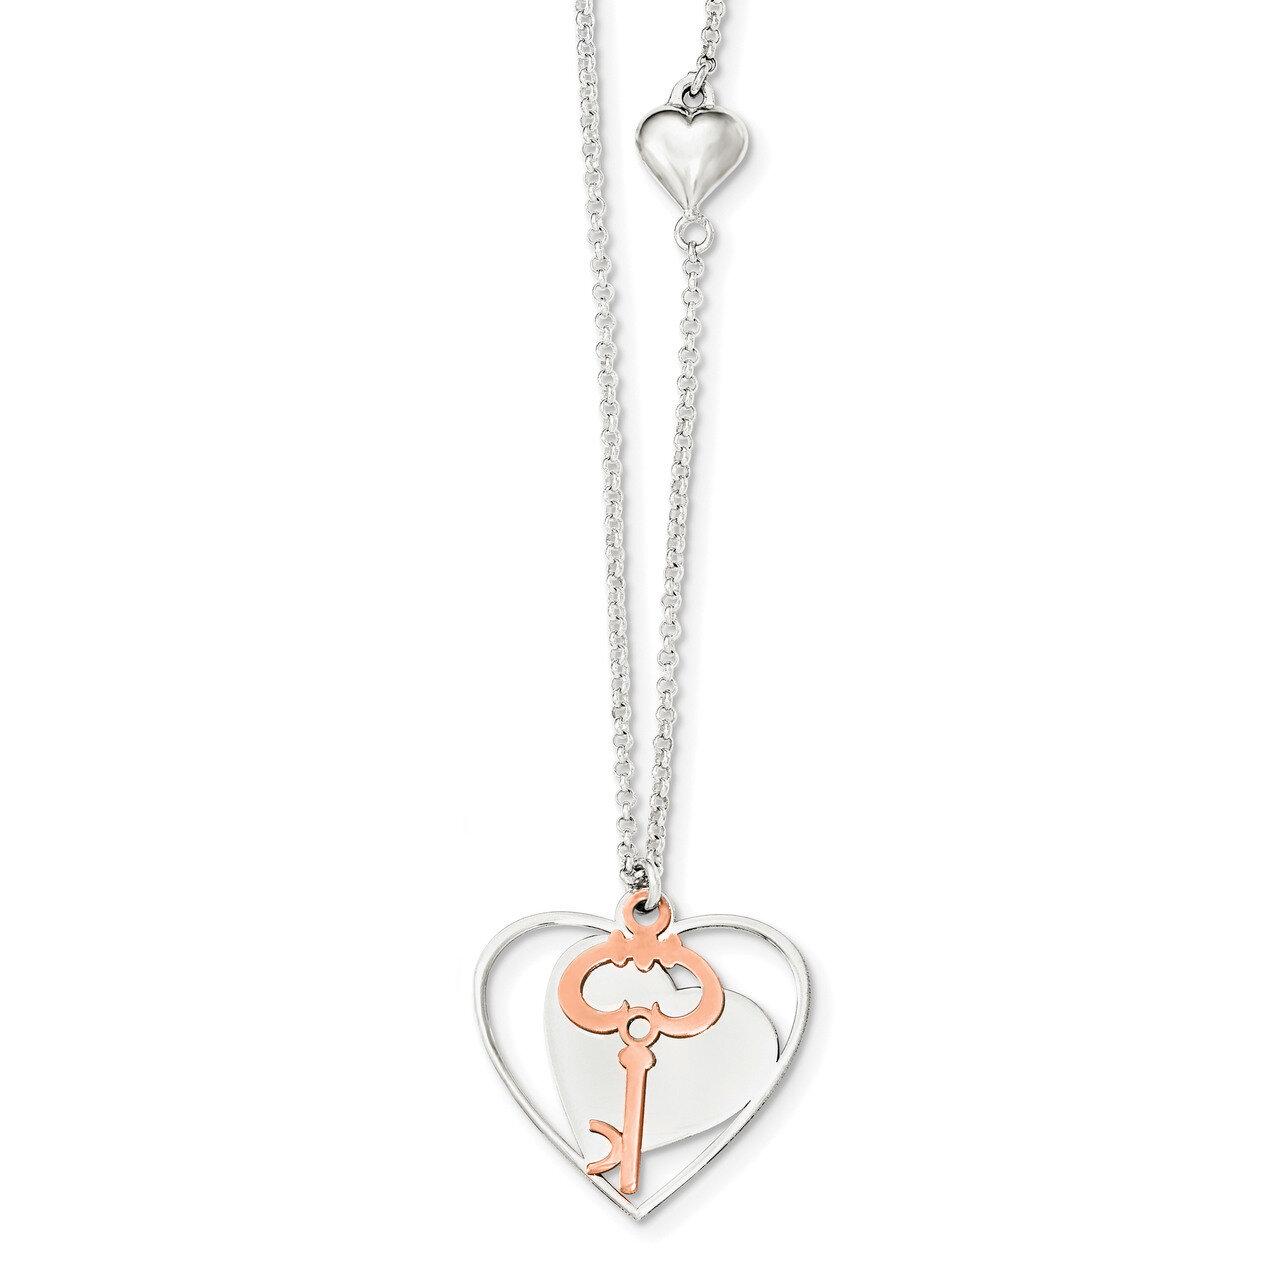 Rose-Tone Polished Moveable Heart Key Necklace 18 Inch Sterling Silver QG4041-18